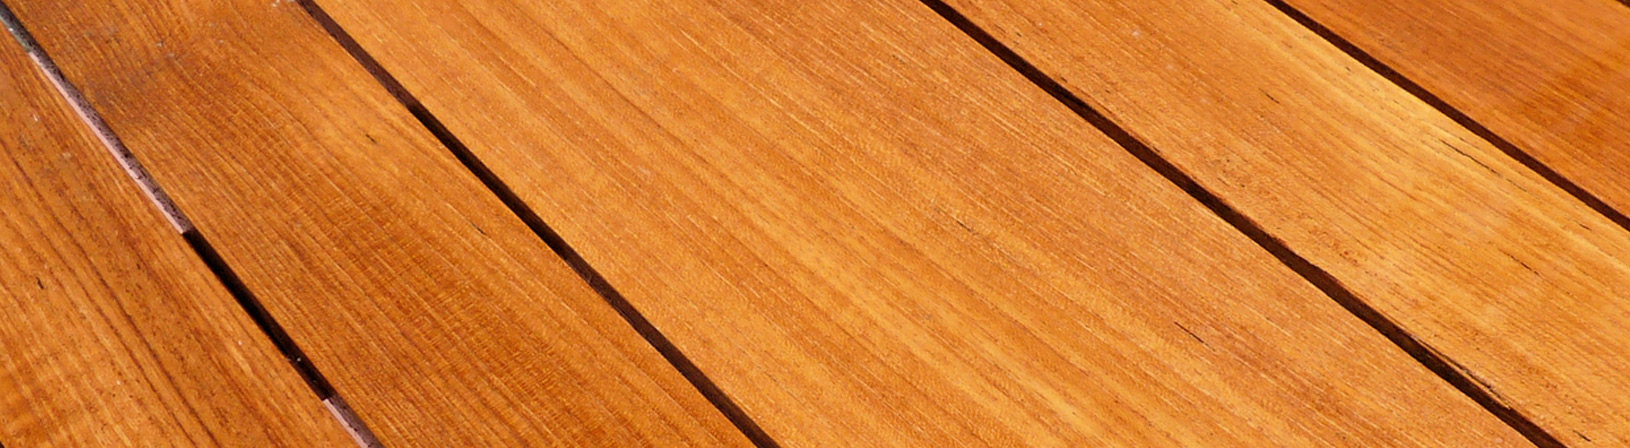 What you need to know about refinishing hardwood floors